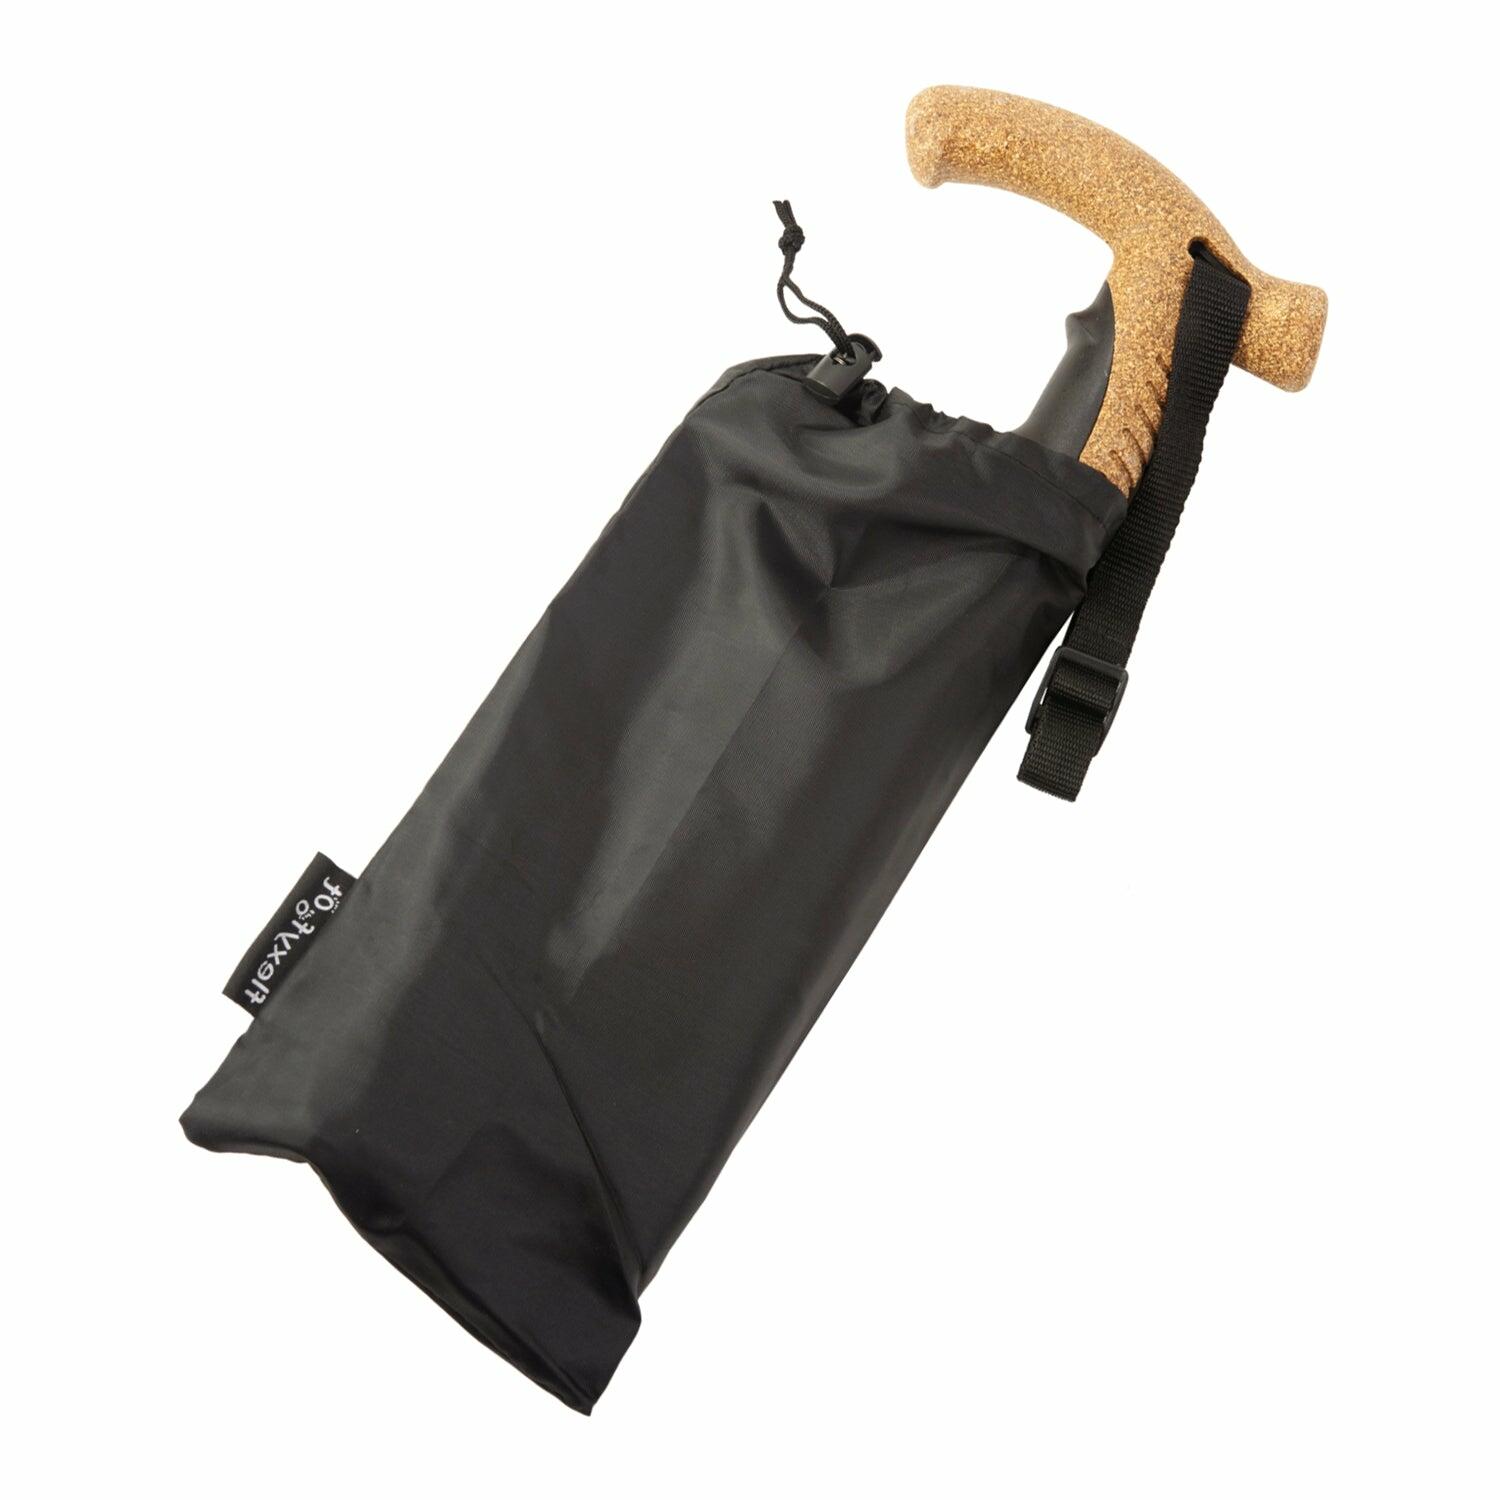 A single red Flexyfoot Premium Cork Handle Folding Walking Stick in the supplied carry bag